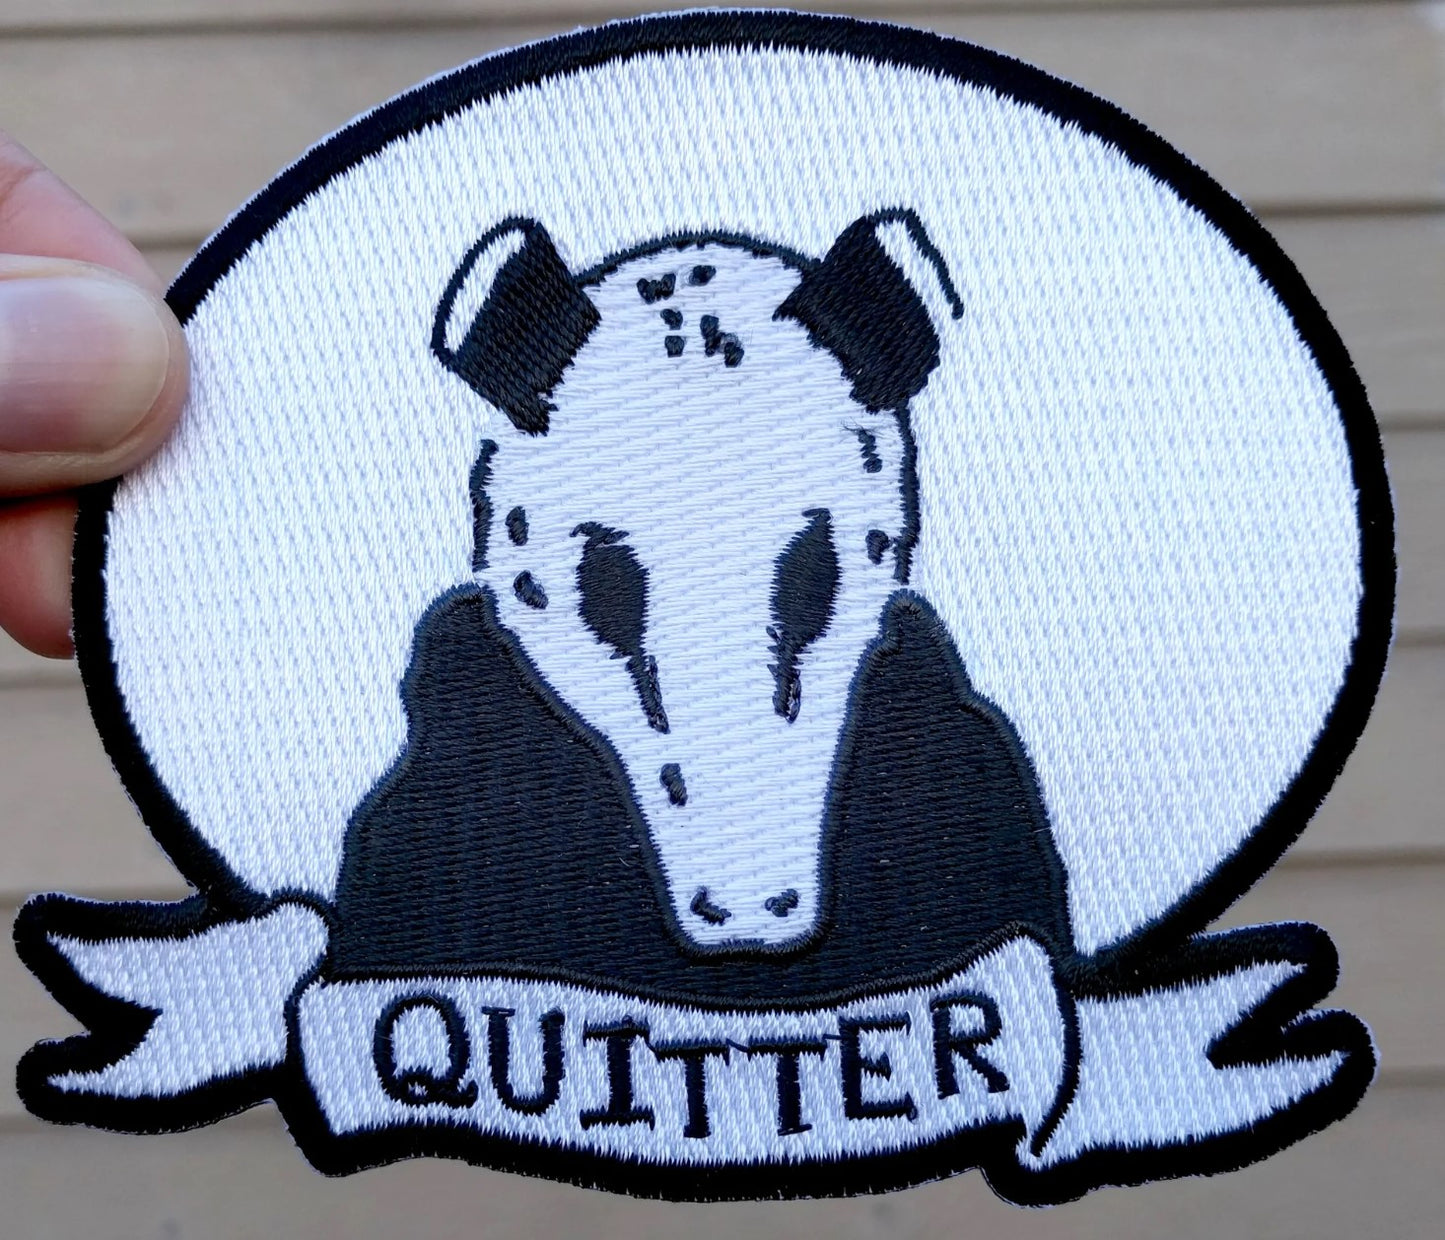 Patch: Quitter